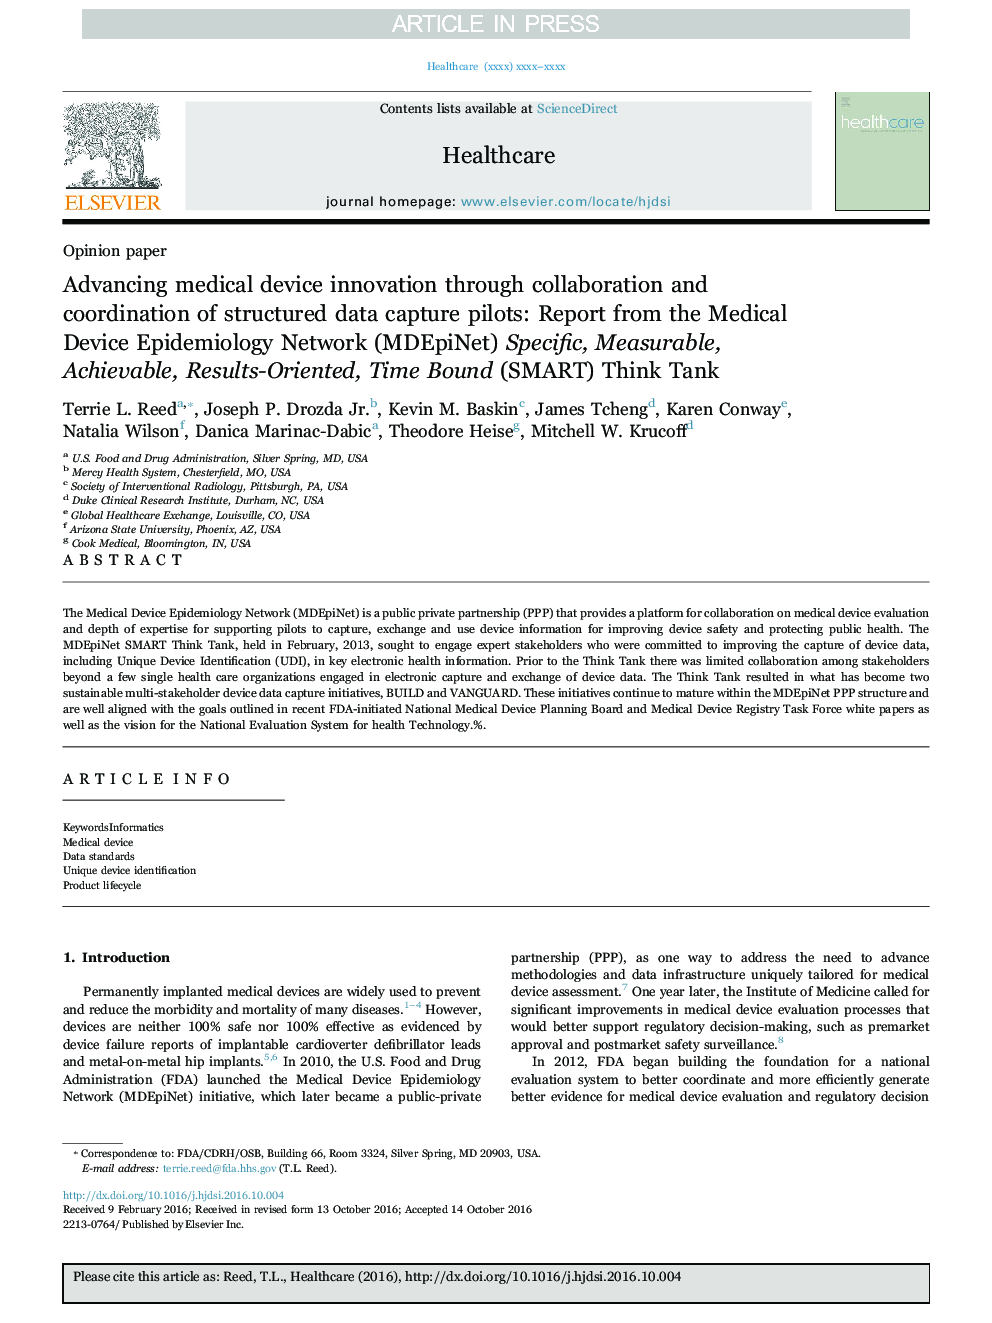 Advancing medical device innovation through collaboration and coordination of structured data capture pilots: Report from the Medical Device Epidemiology Network (MDEpiNet) Specific, Measurable, Achievable, Results-Oriented, Time Bound (SMART) Think Tank